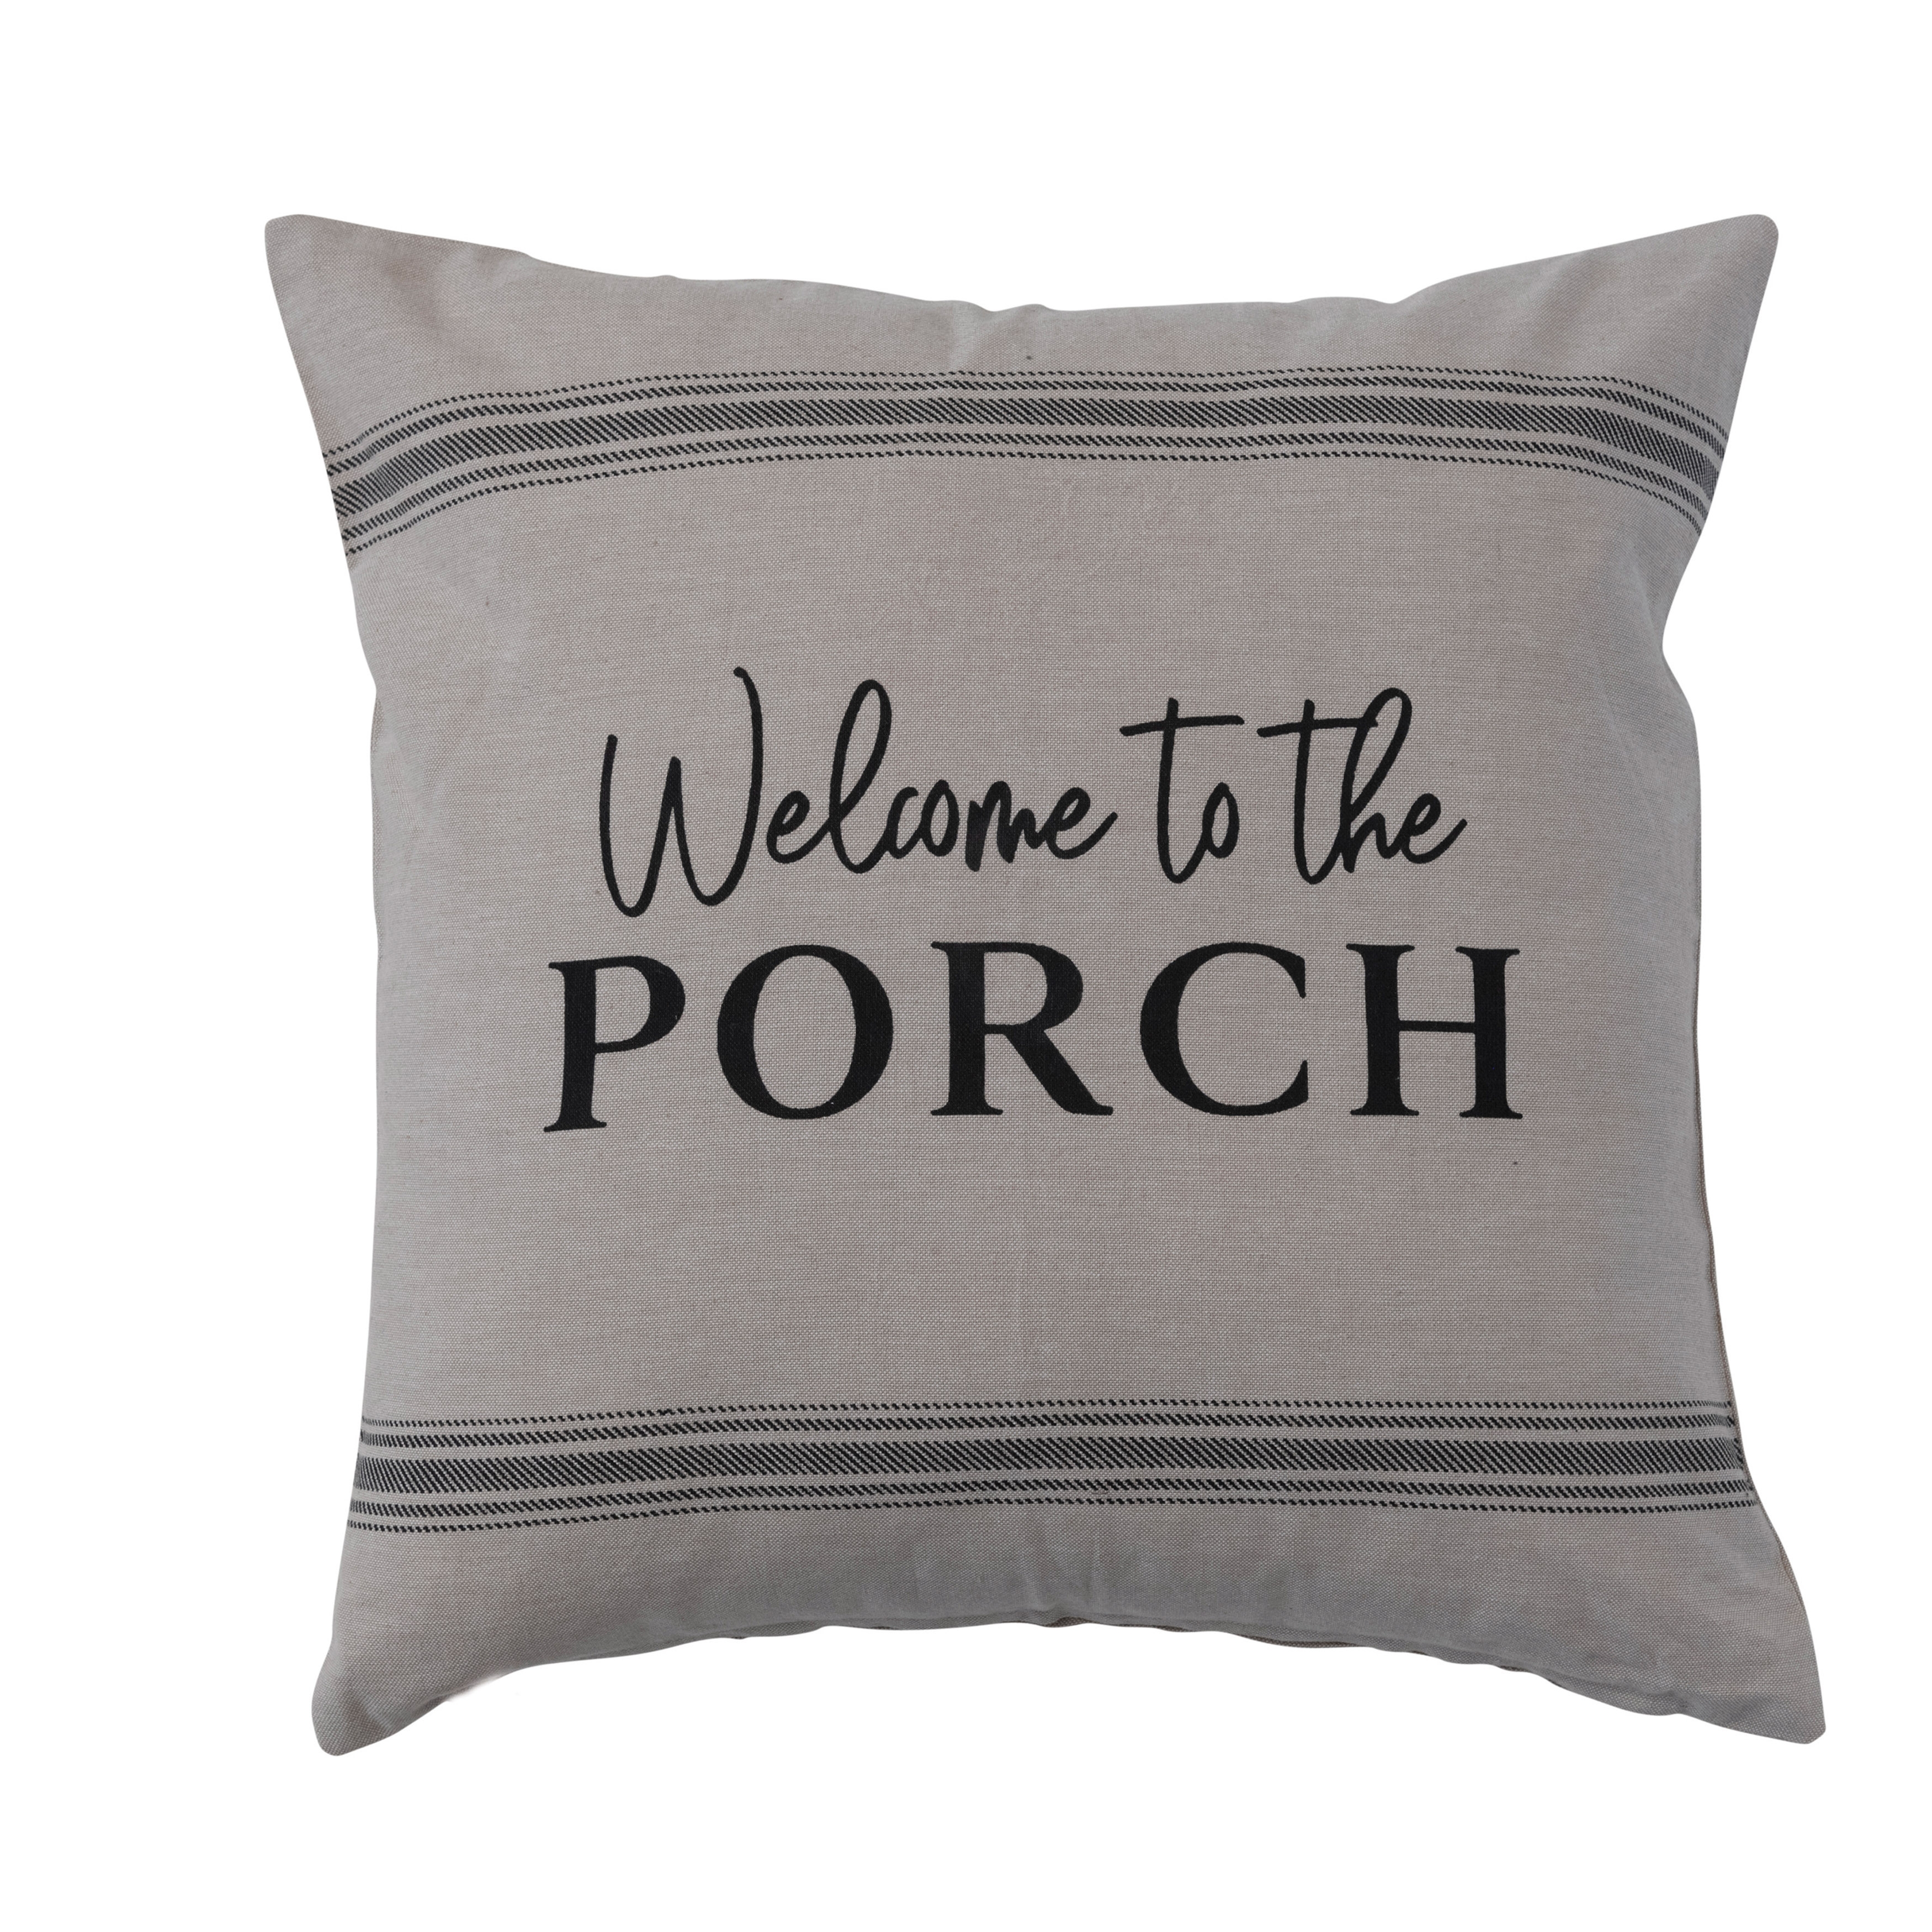 Cotton Chambray Throw Pillow with "Welcome to the Porch" Message, White and Black - Image 0